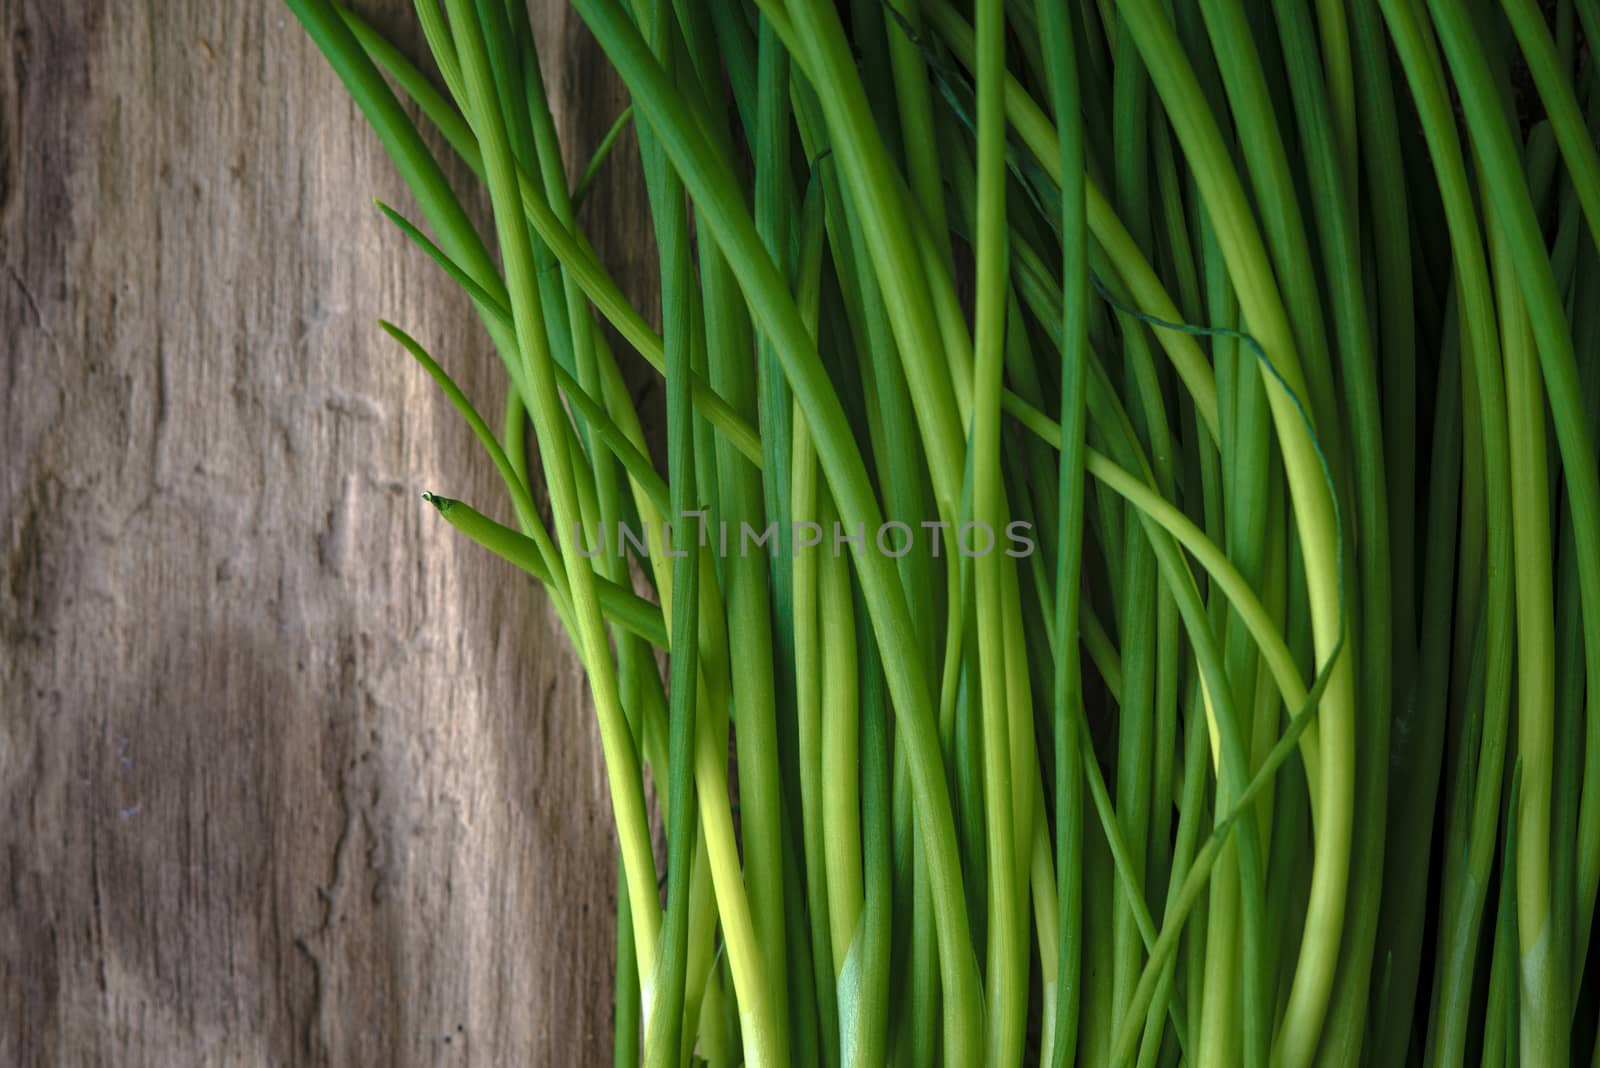 Green stalks of onions on a wooden table horizontal